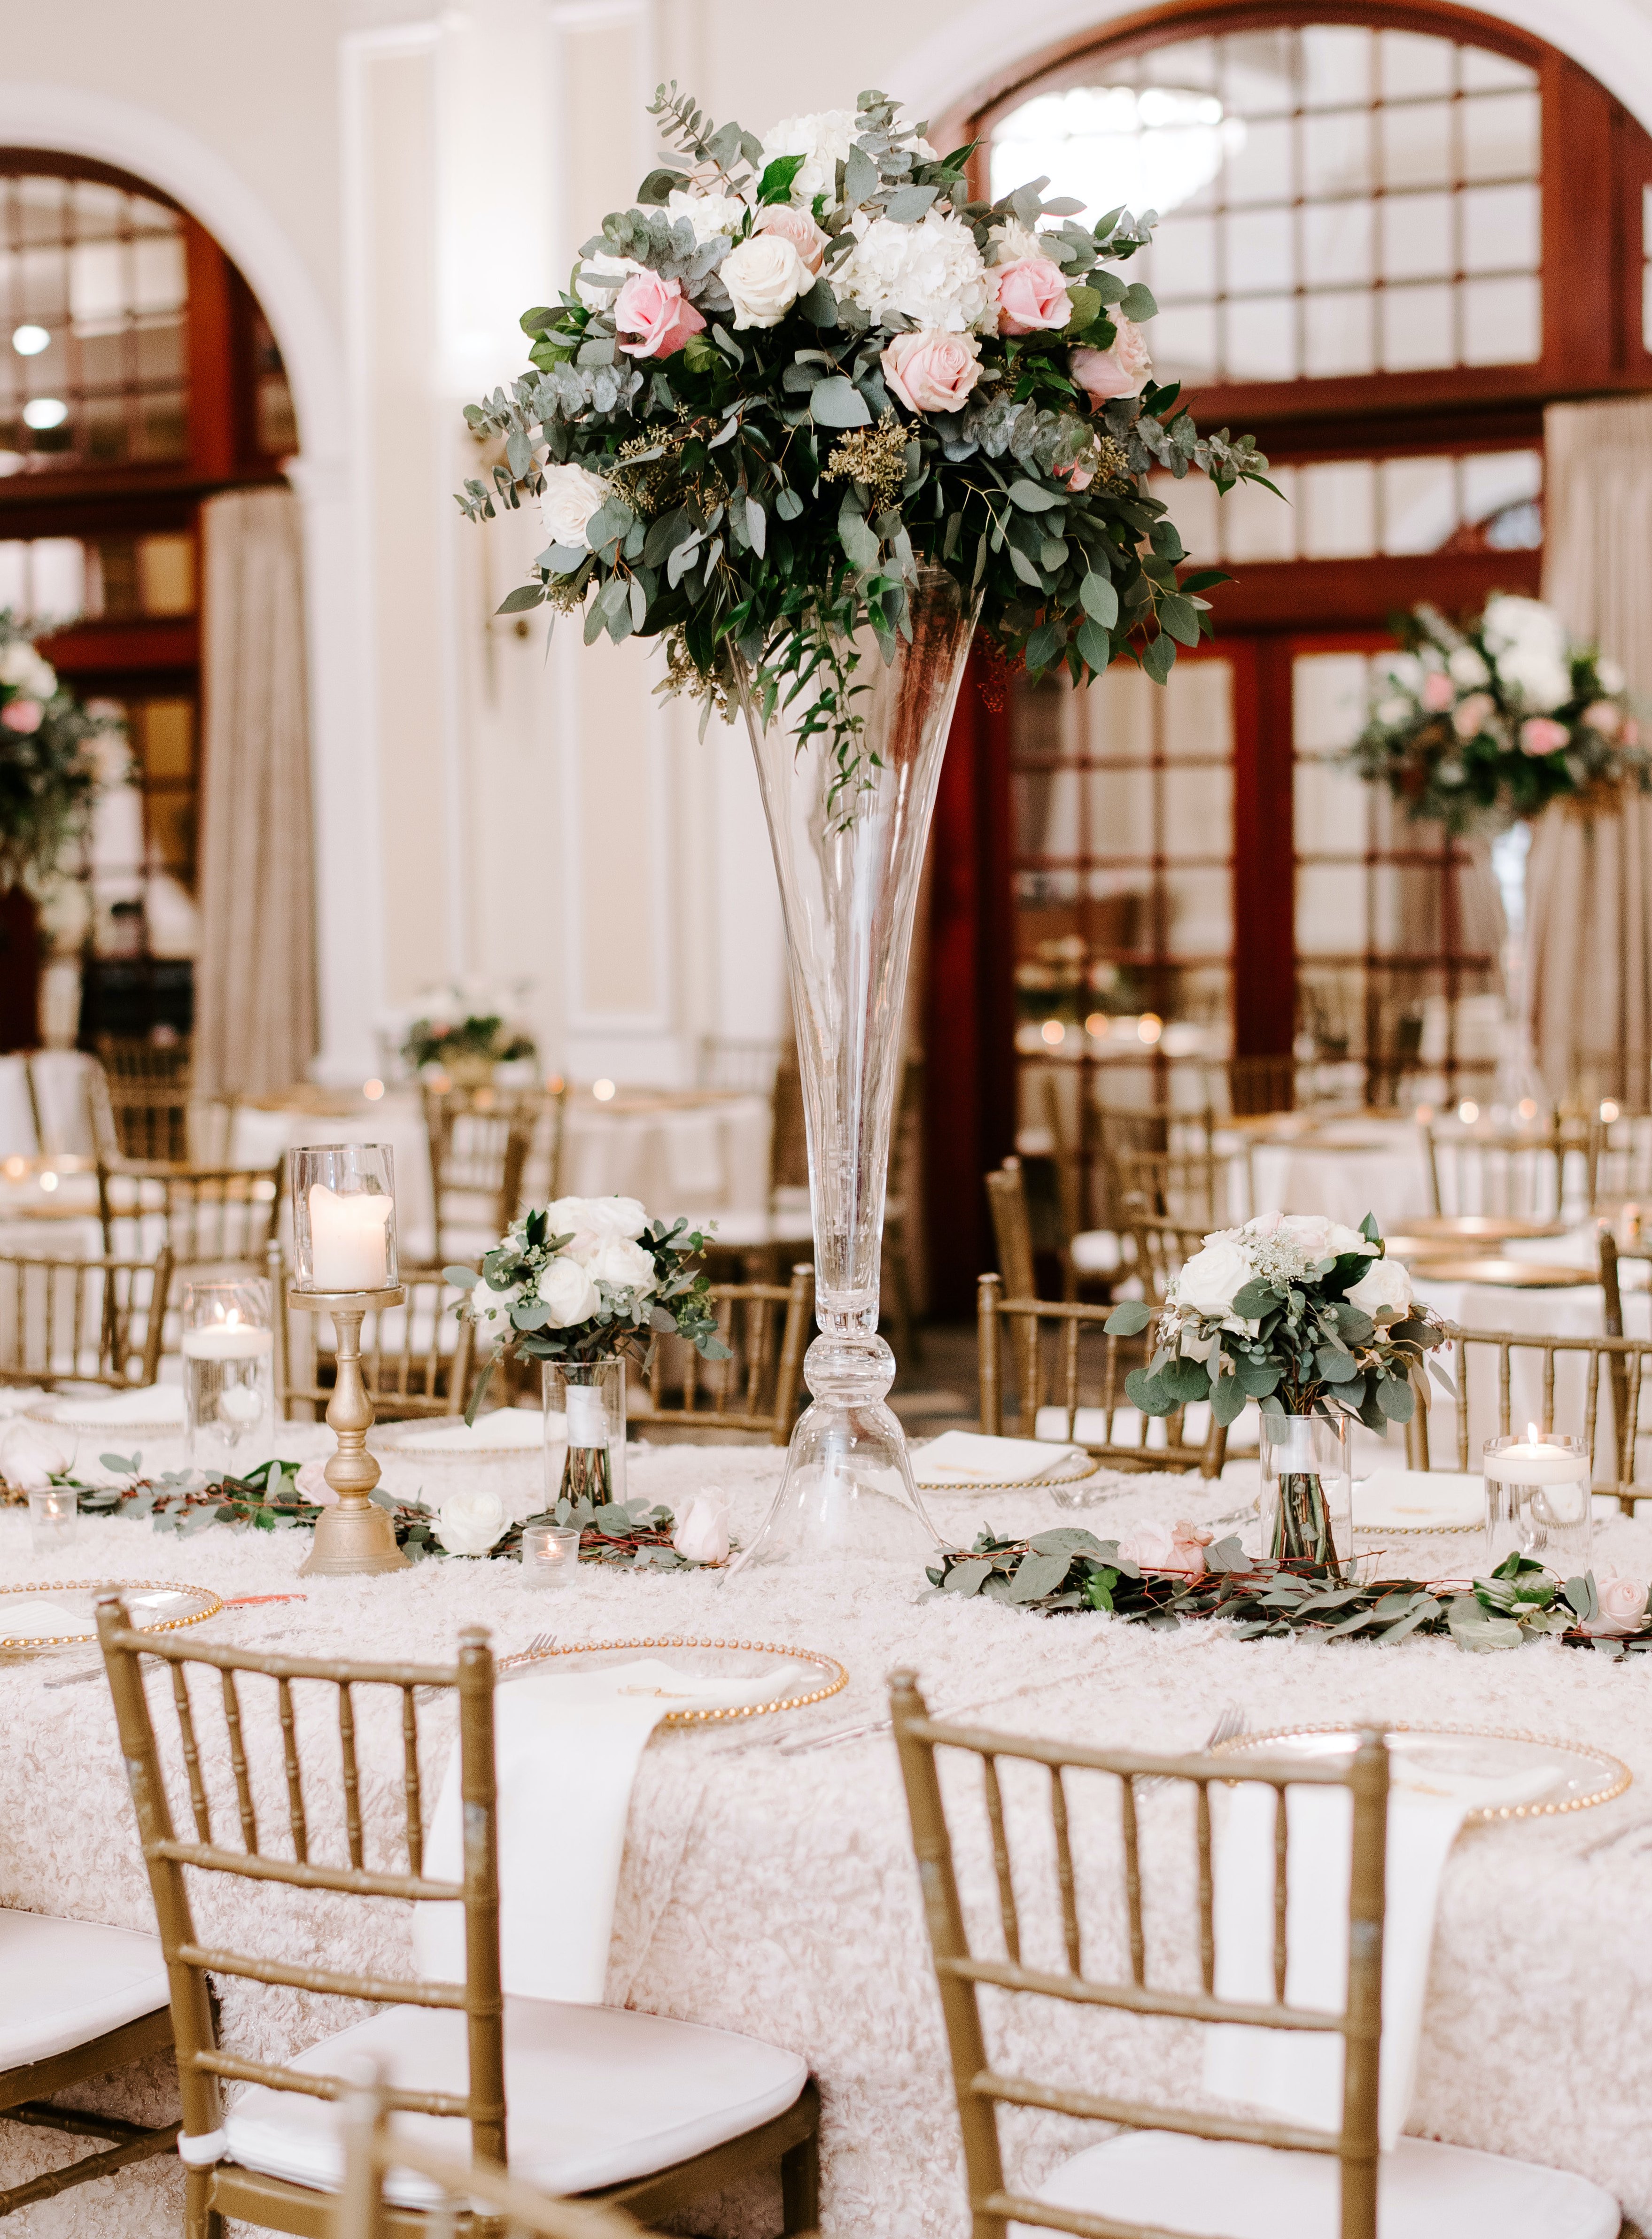 A floral centerpiece in the reception room of The Crystal Ballroom.